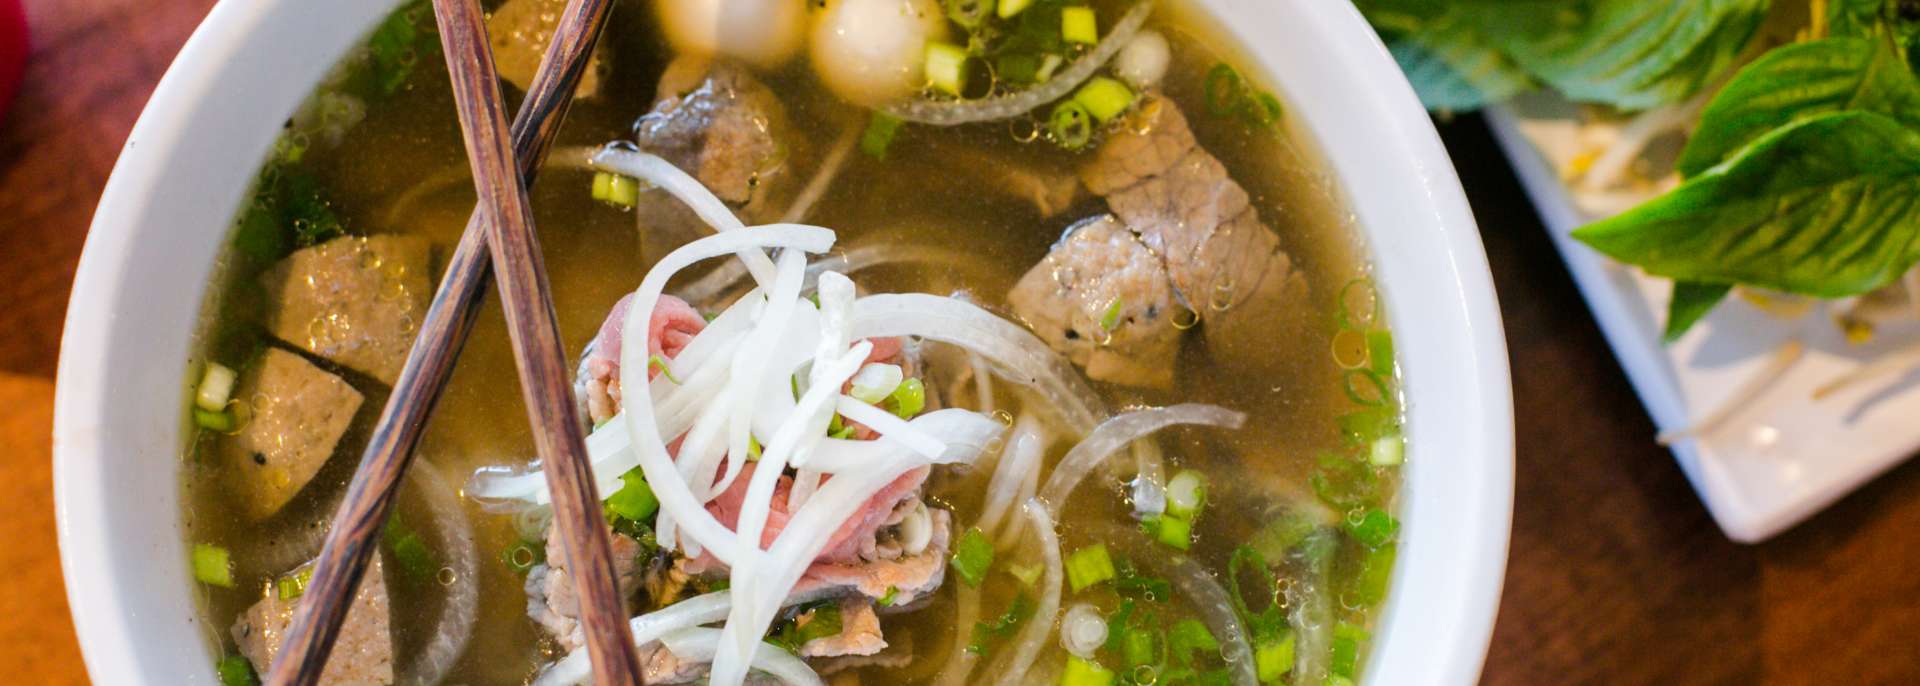 https://assets.simpleviewinc.com/simpleview/image/upload/c_fill,h_686,q_60,w_1920/v1/clients/neworleans/lillys_cafe_vietnamese_pho_72ad279f-40a9-4db0-af9b-bf9994c10eef.jpg